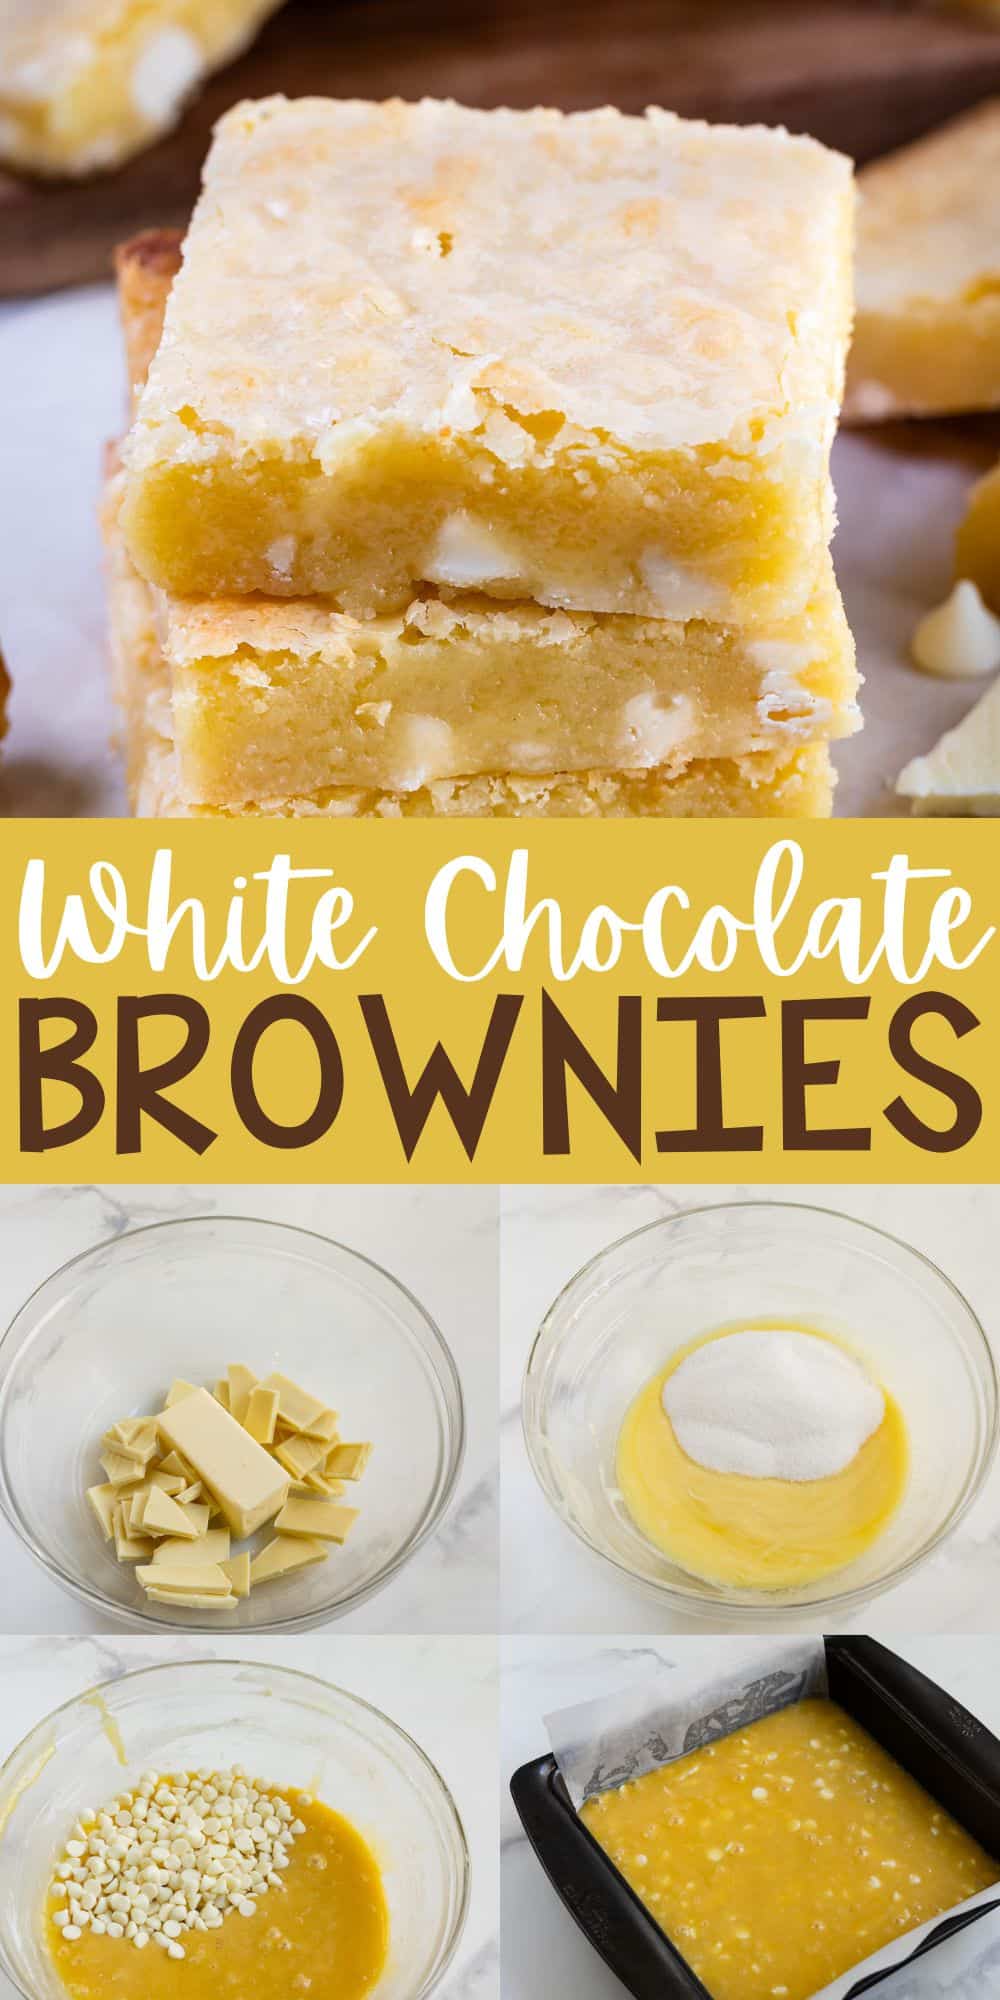 two photos of stacked yellow brownies with white chocolate chips baked in with words on the image.